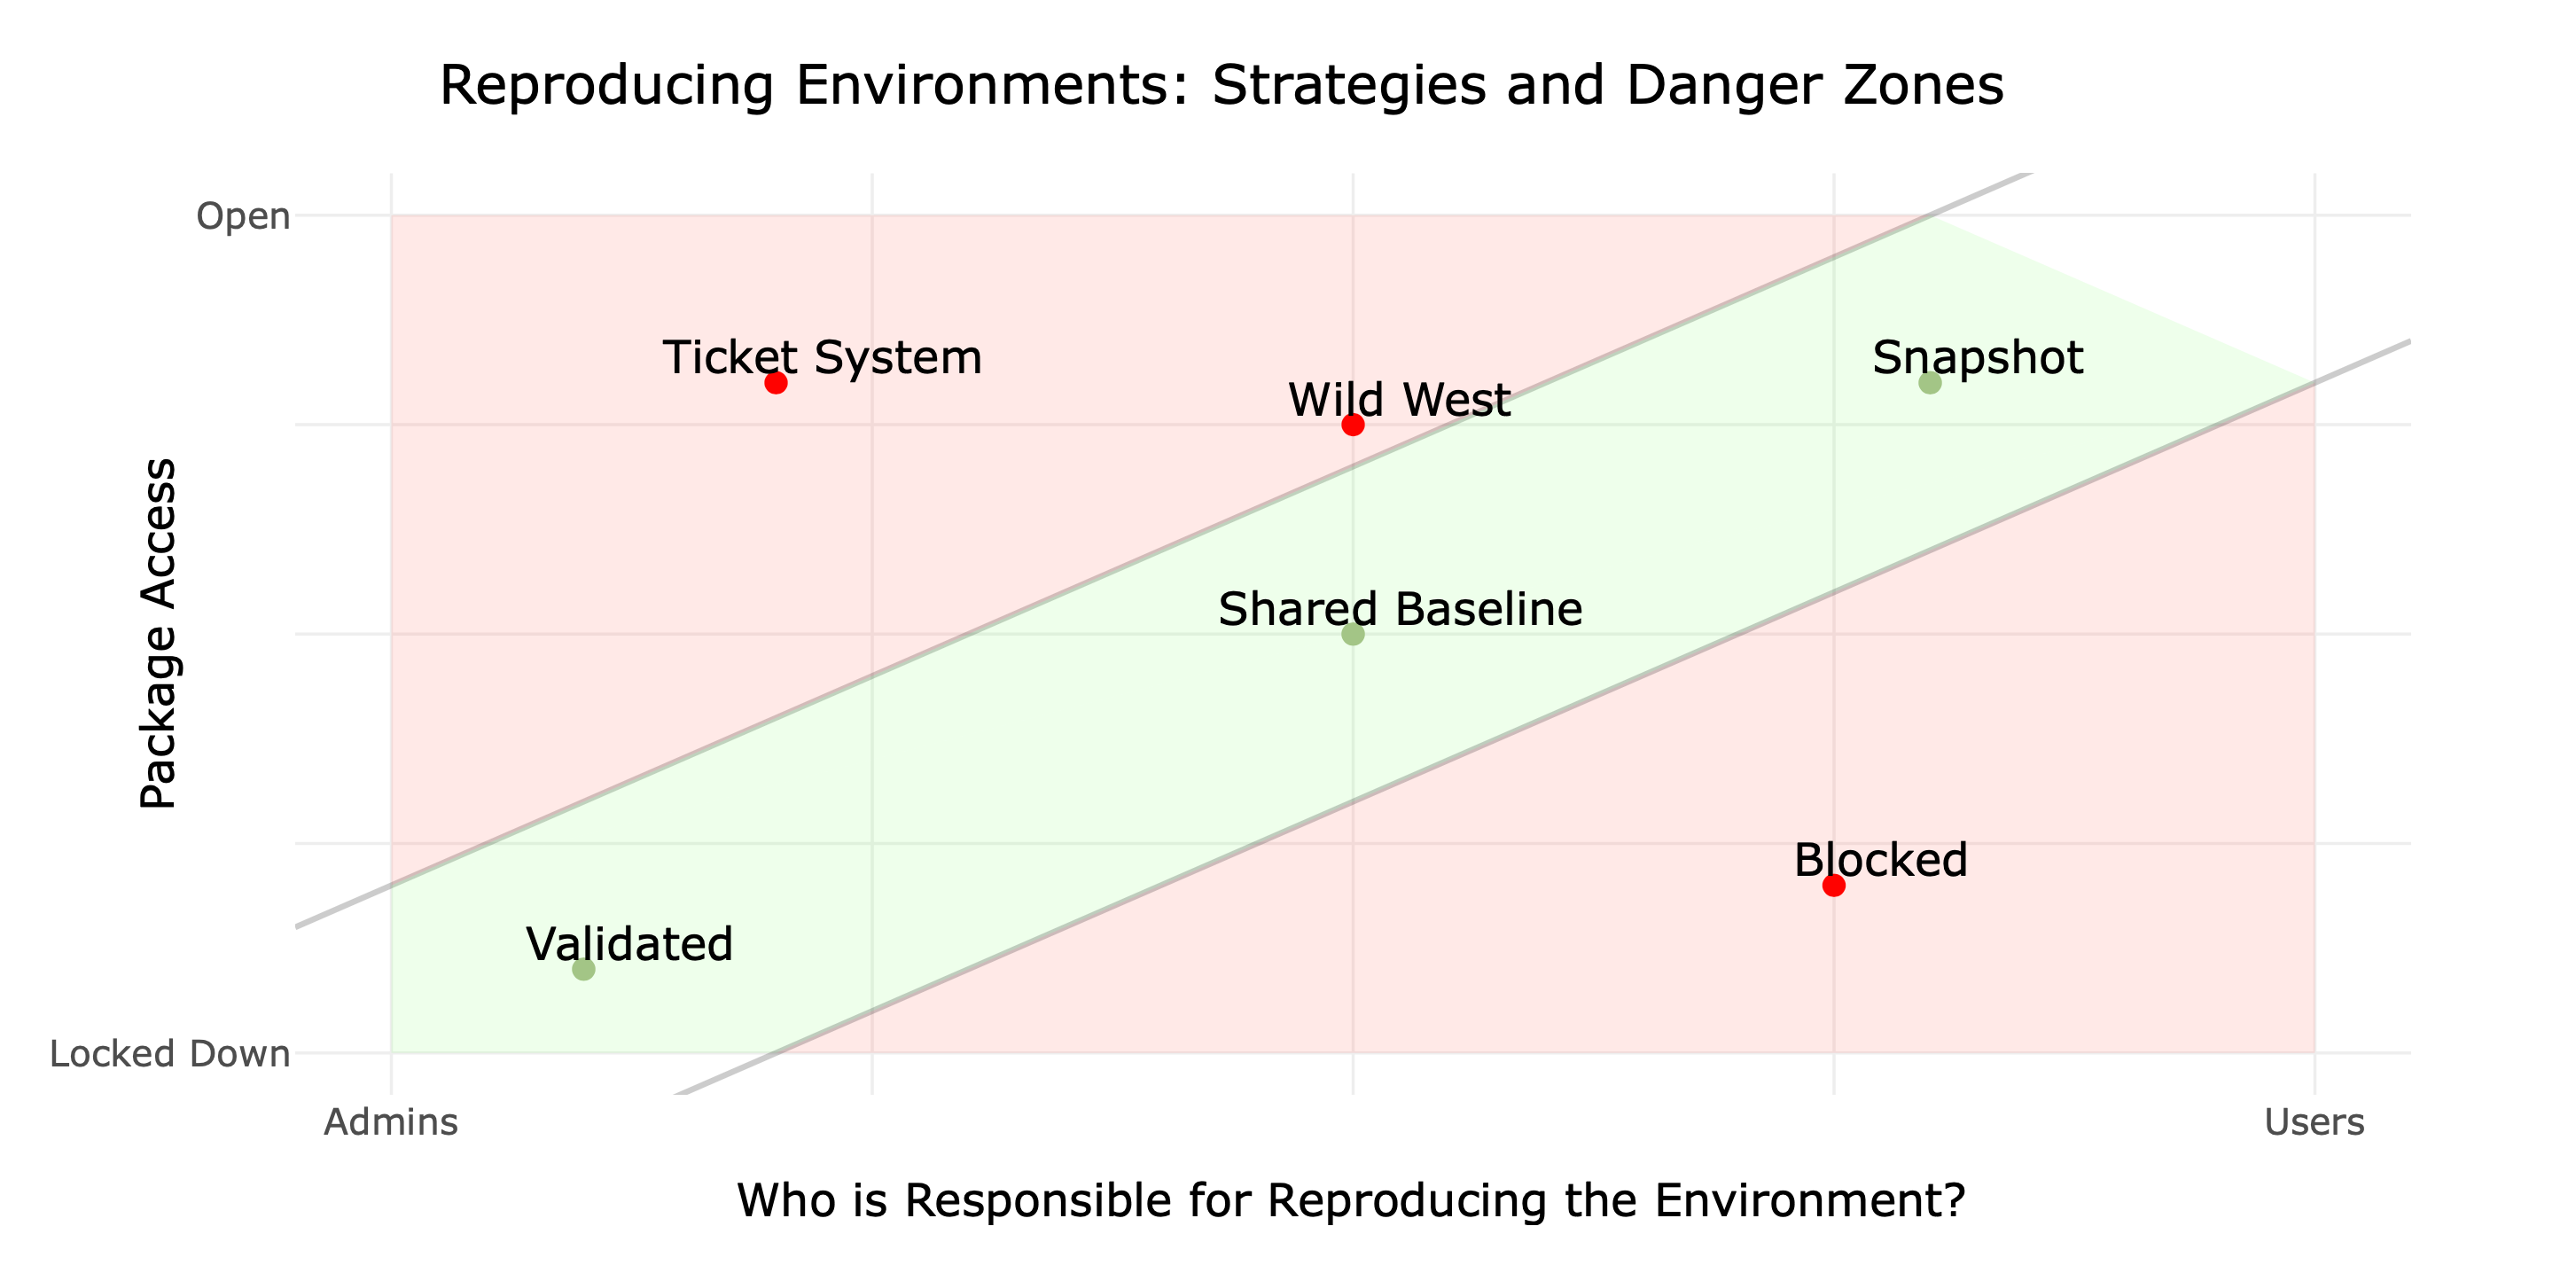 Graph showing Who is Responsible on the x-axis, with Admins on the far left, Users on the far right. Package Access on the y-axis with locked down on the bottom and Open at the top. Three strategies fall into a green zone along these axis, moving upward, left to right: Validated, Shared Baseline, and Snapshot.